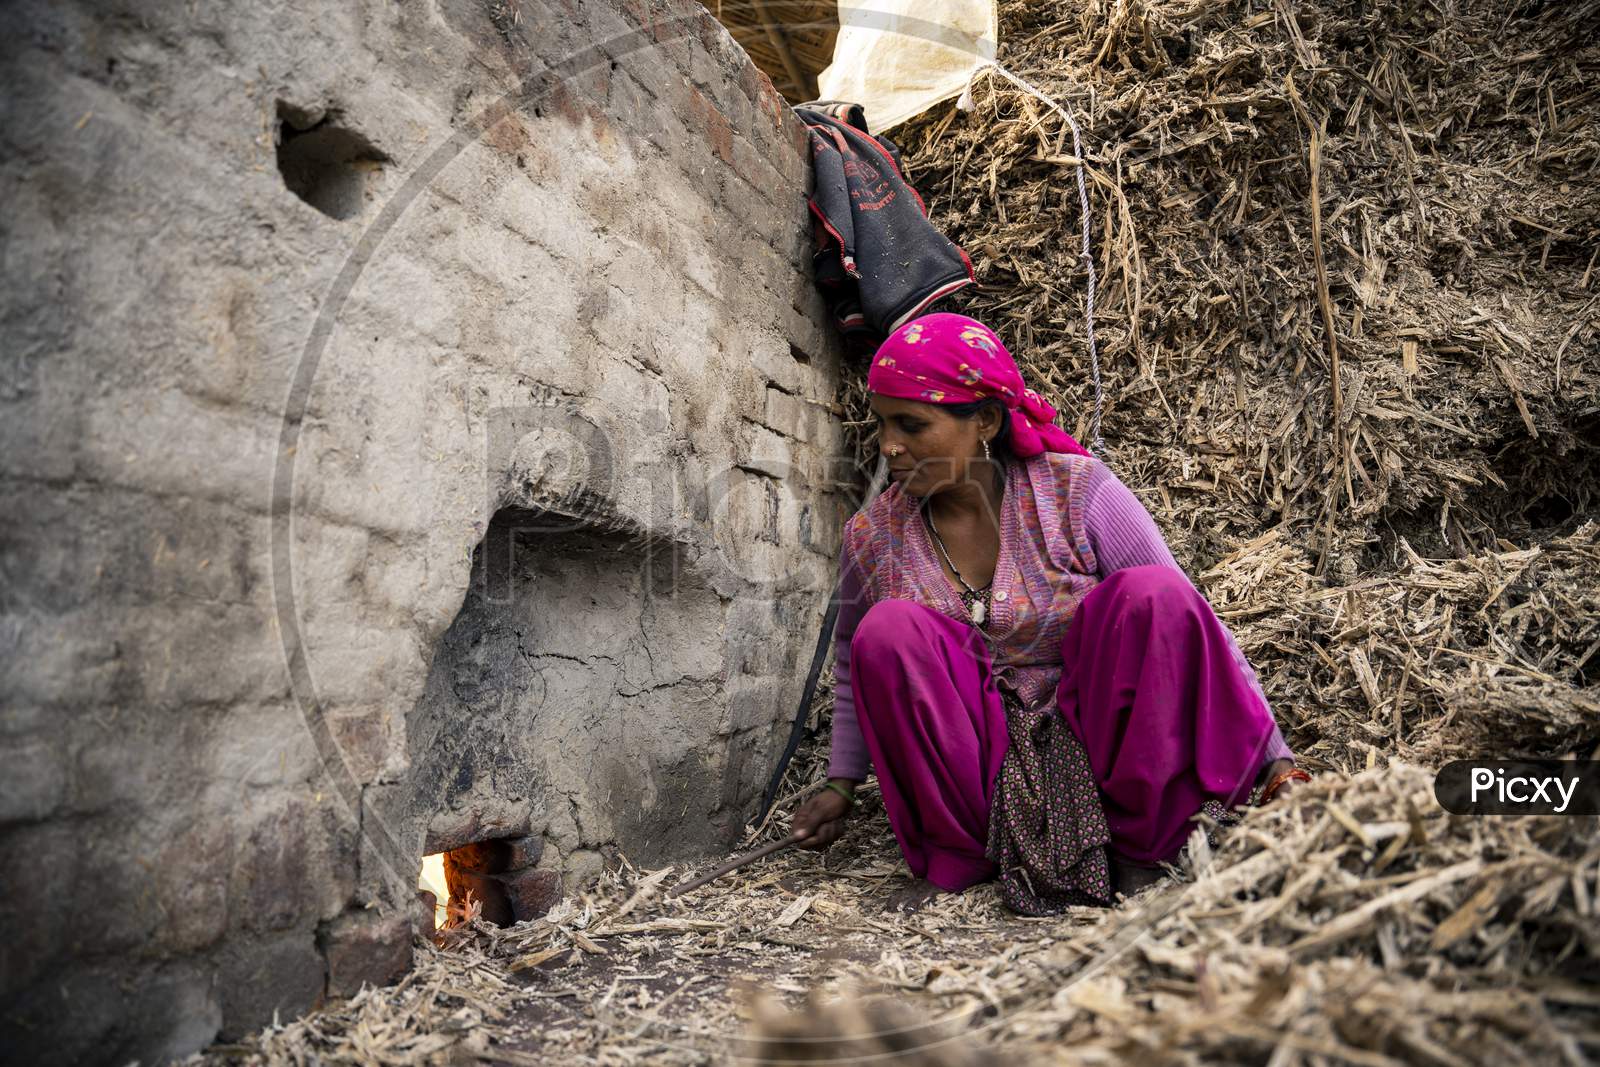 Moradabad, Uttar Pradesh- January 12 2022- A Village Woman Working In The Jaggery Making Factory. Woman Working With Waste Sugarcane.